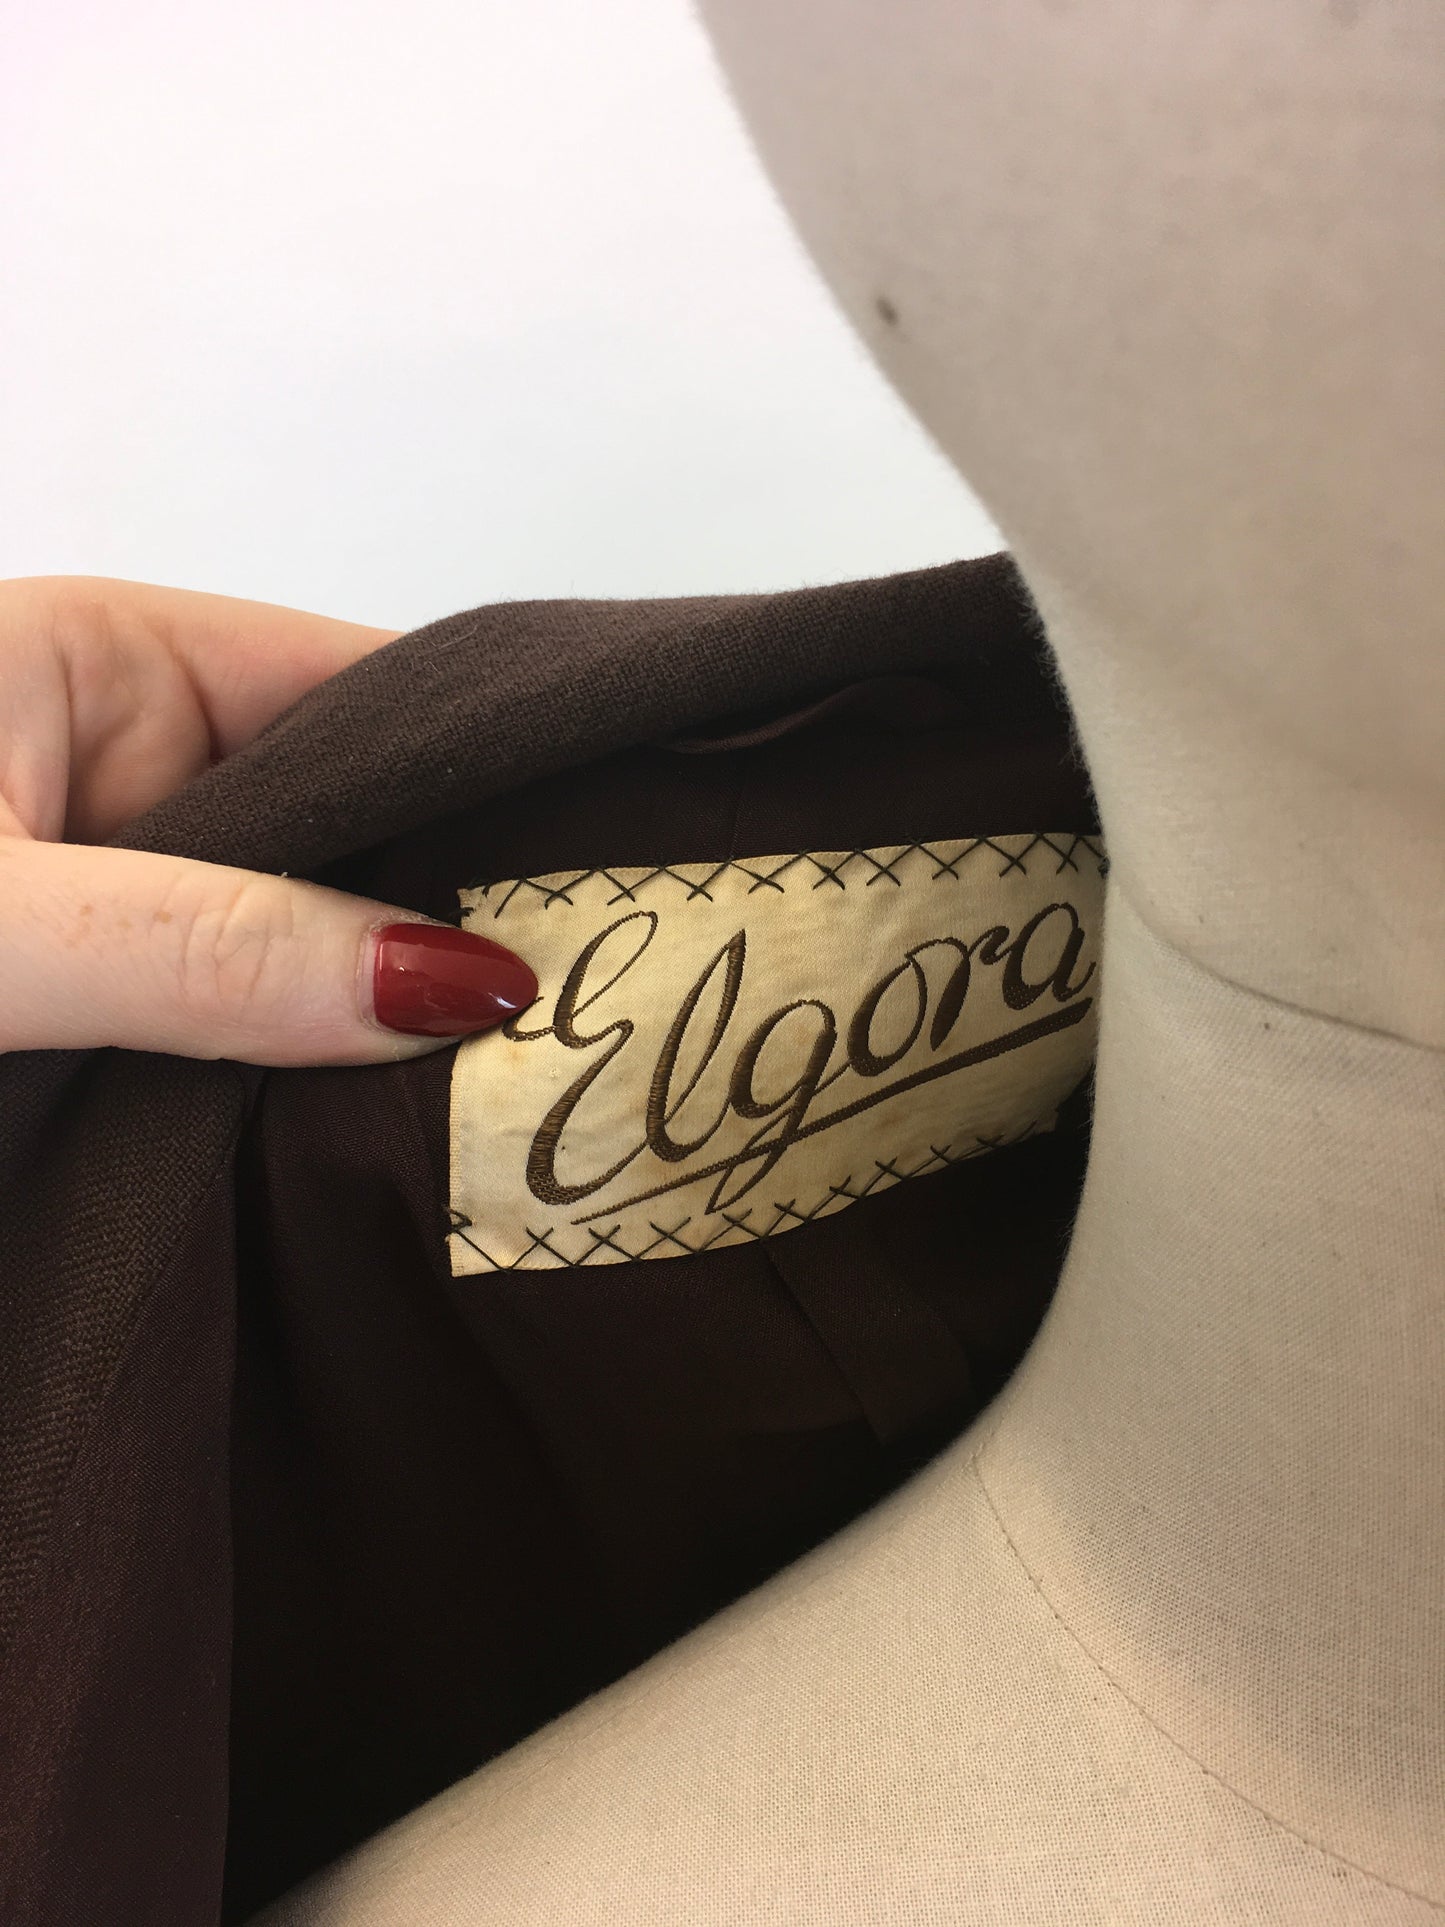 Original 1940's Stunning Dinner Plate Label Jacket - In A Chocolate Brown